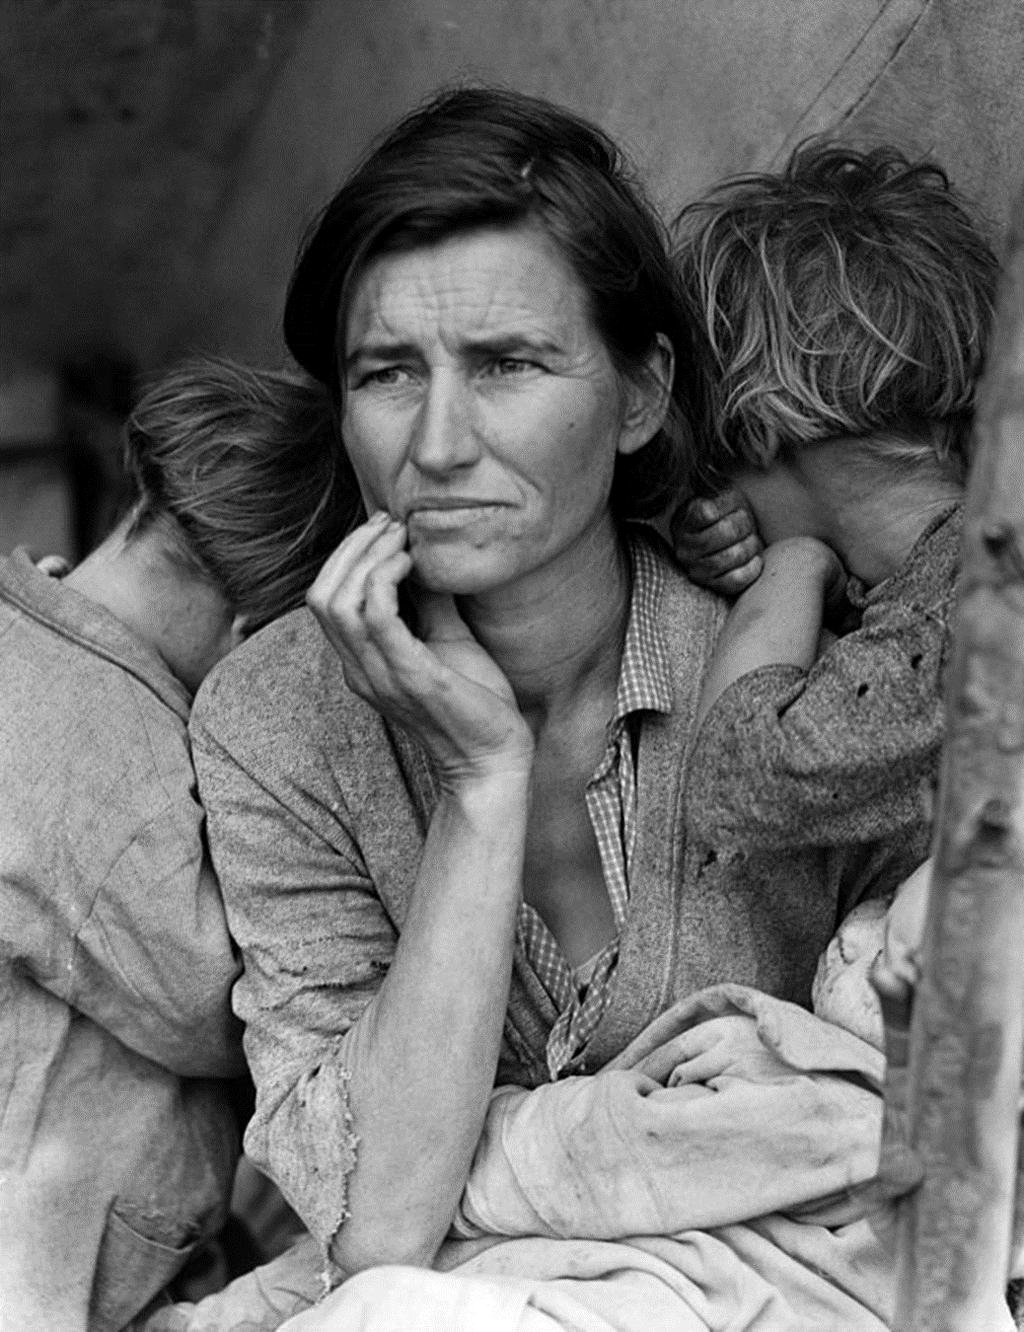 More familiar to us this image is of the Migrant Mother whose name is Florence Owens Thompson.